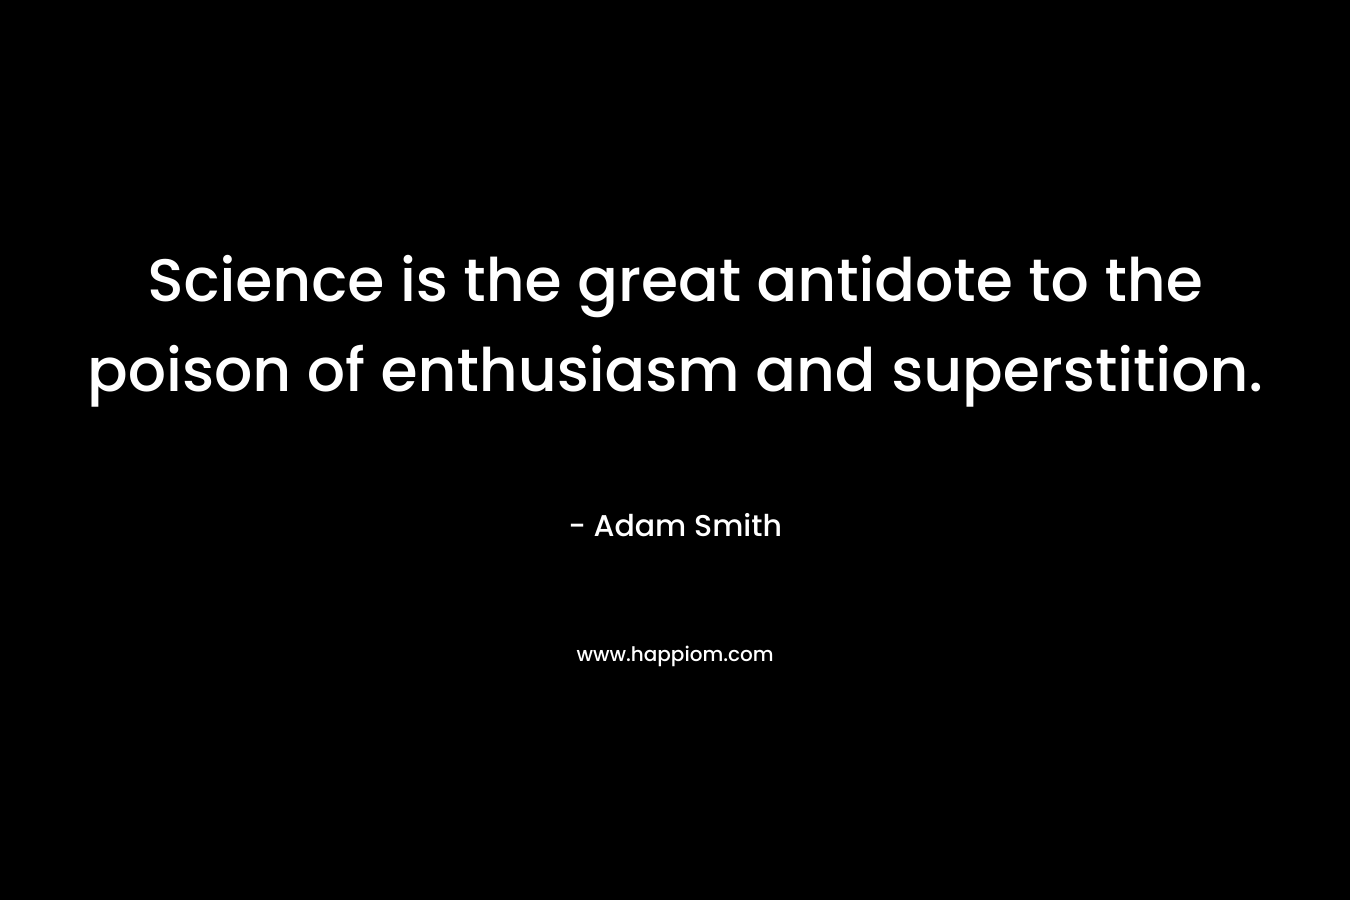 Science is the great antidote to the poison of enthusiasm and superstition. – Adam Smith